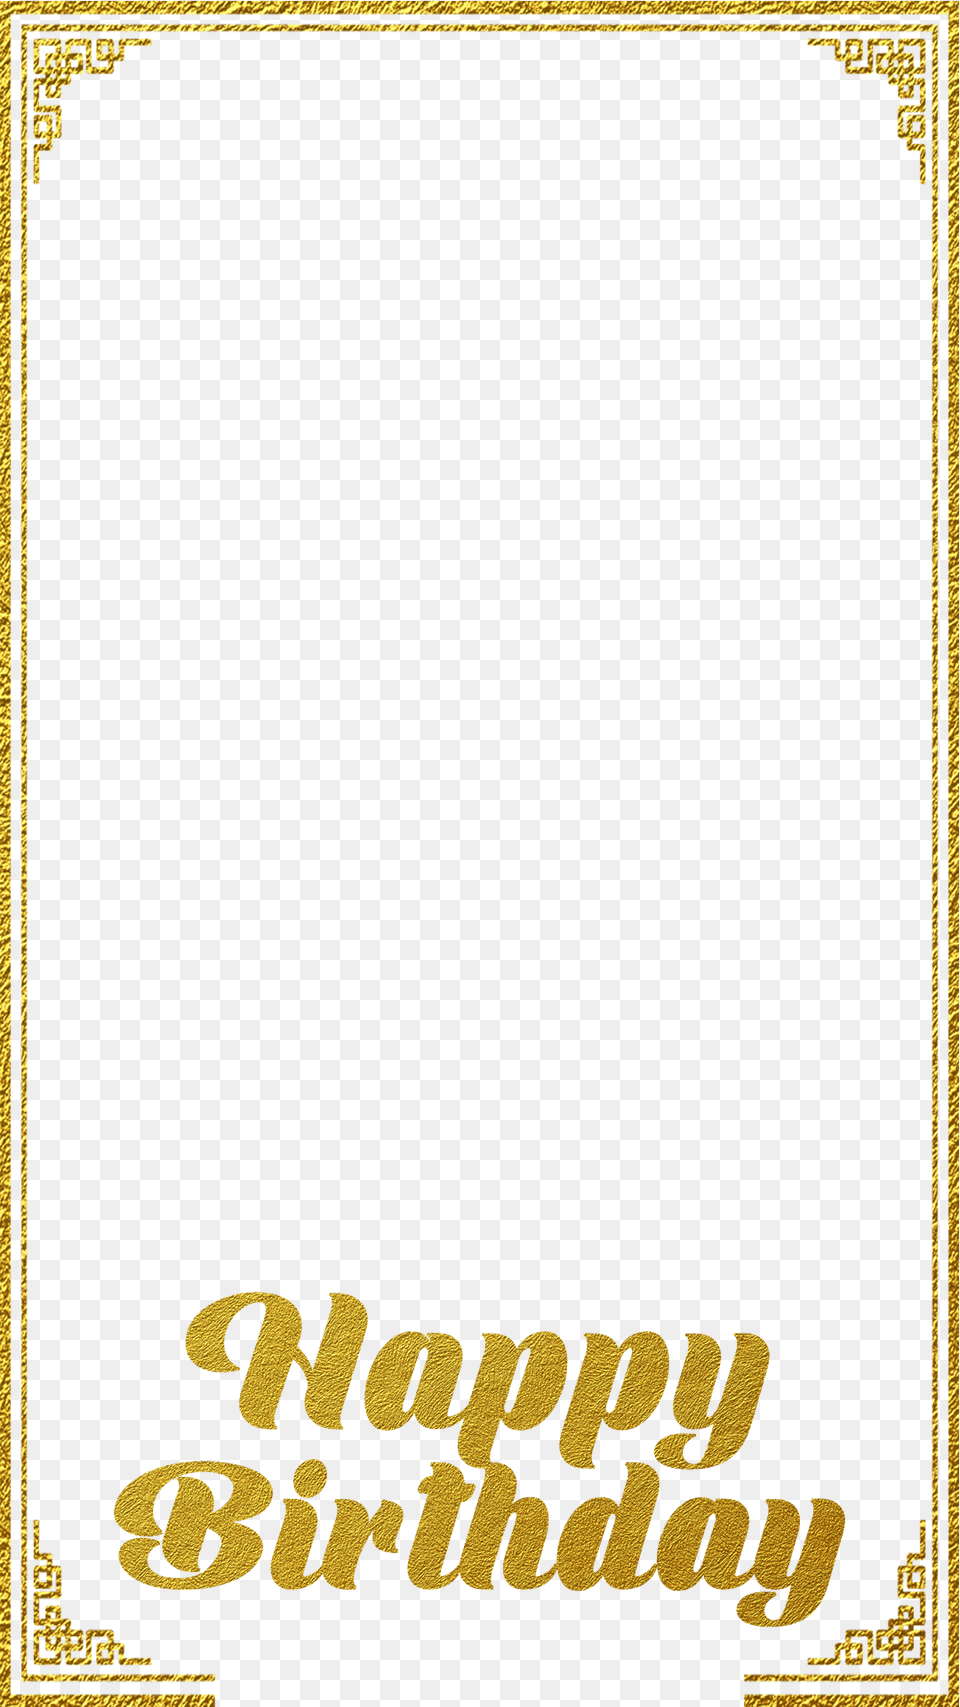 Gold Frame Birthday Snapchat Filter Geofilter Maker Poster, Home Decor, Rug, Book, Publication Png